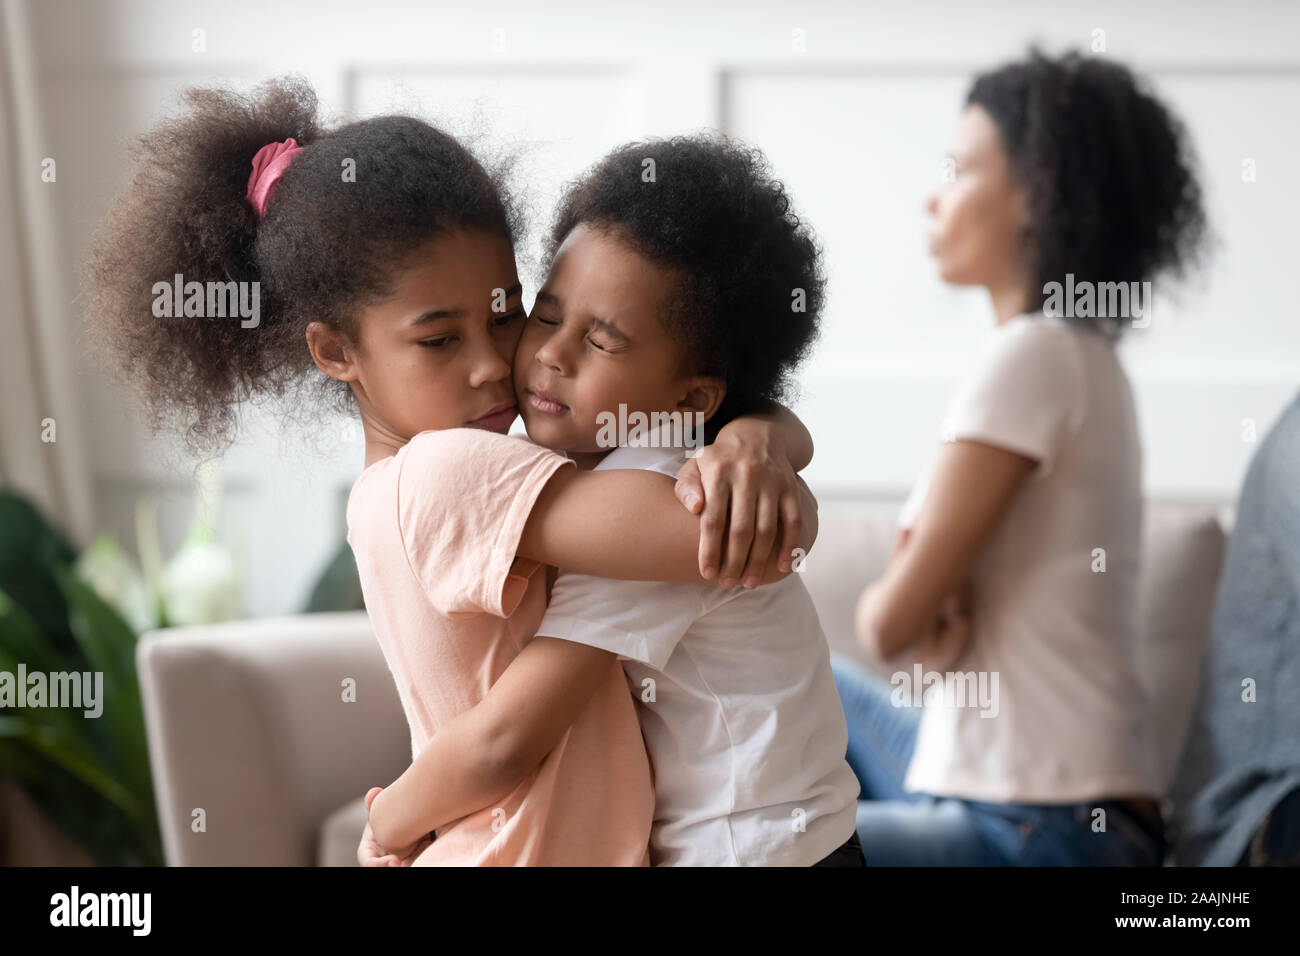 Little african kids embracing passing through divorce of parents together Stock Photo